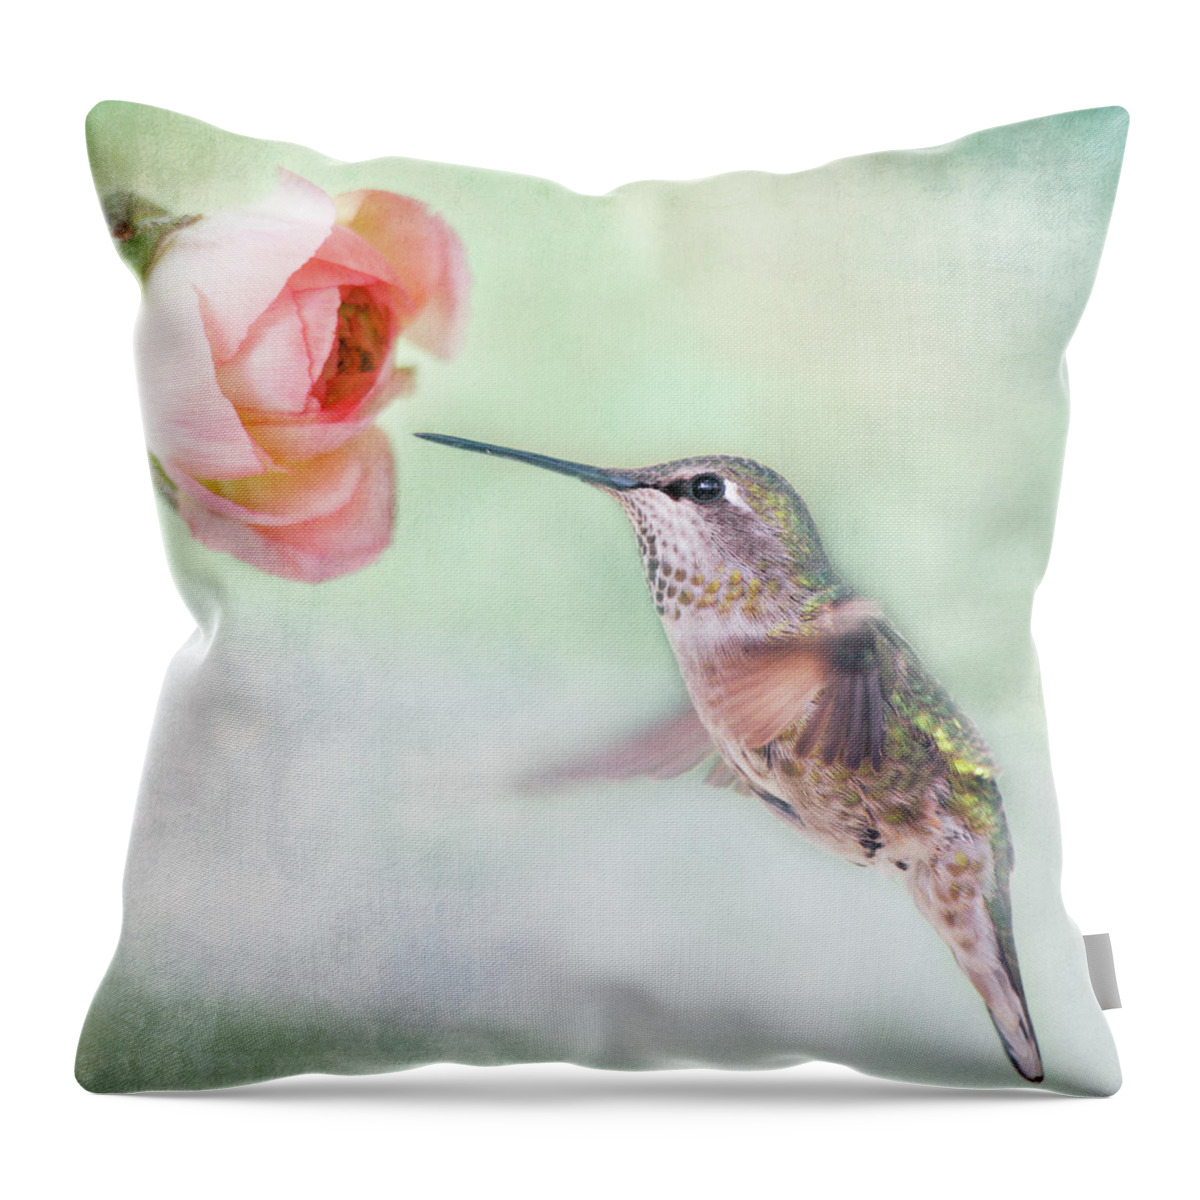 Animal Themes Throw Pillow featuring the photograph Hummingbird And Ranunculus by Susangaryphotography